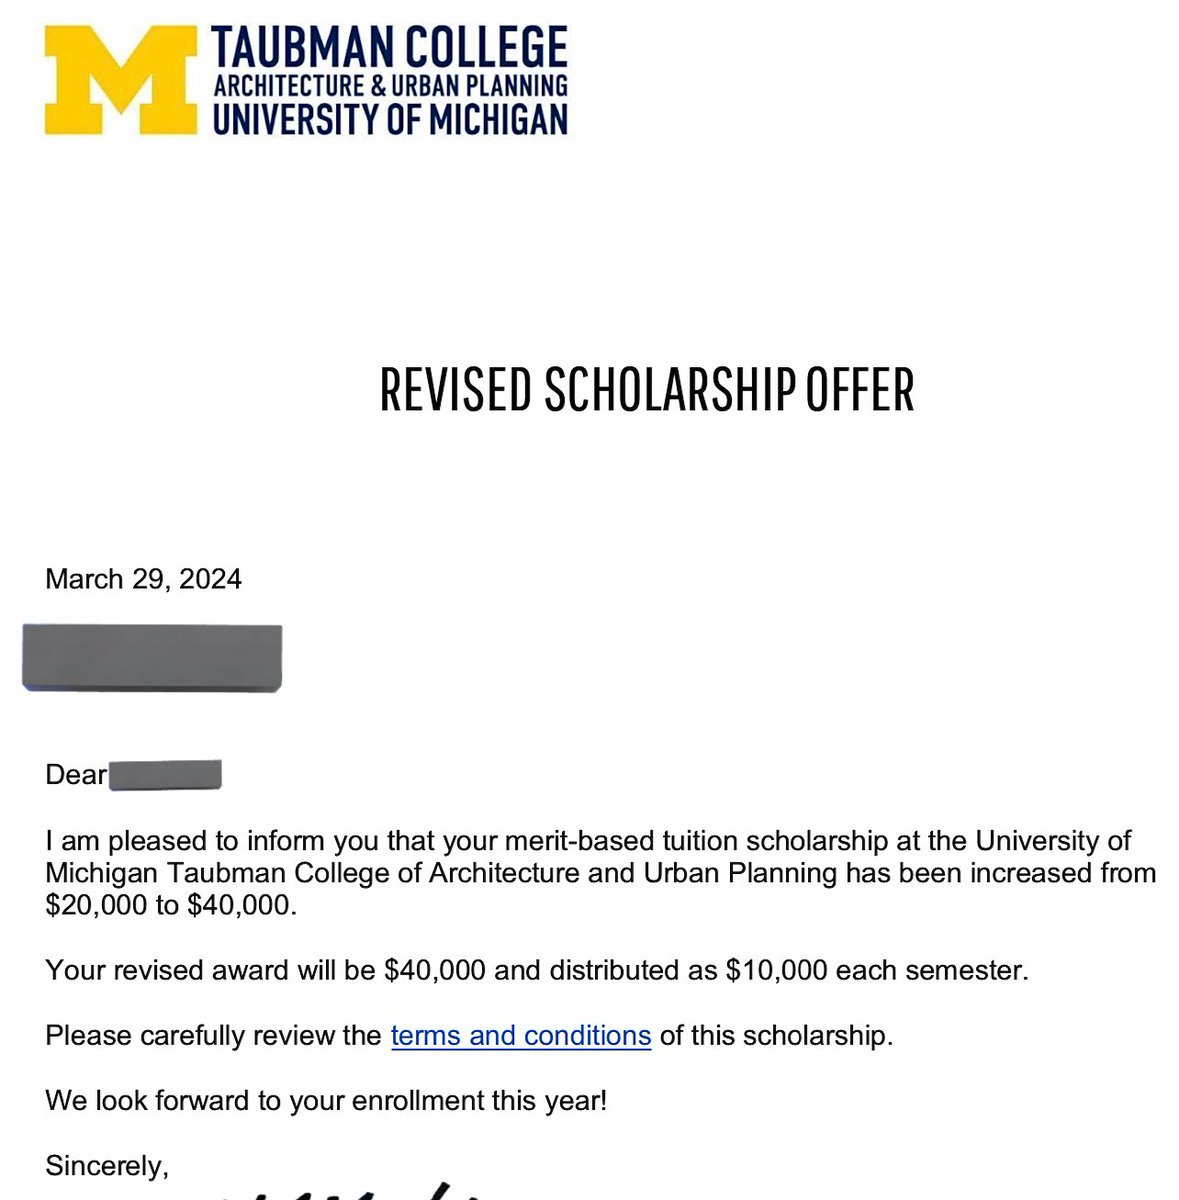 Masters in Architecture at The prestigious University of Michigan 🤓 This client re-negotiated his funding offer ! An initial funding offer was made to this client for $20,000. A revised offer - $40,000 in total funding. 💰 #StudyAbroadWithIBS